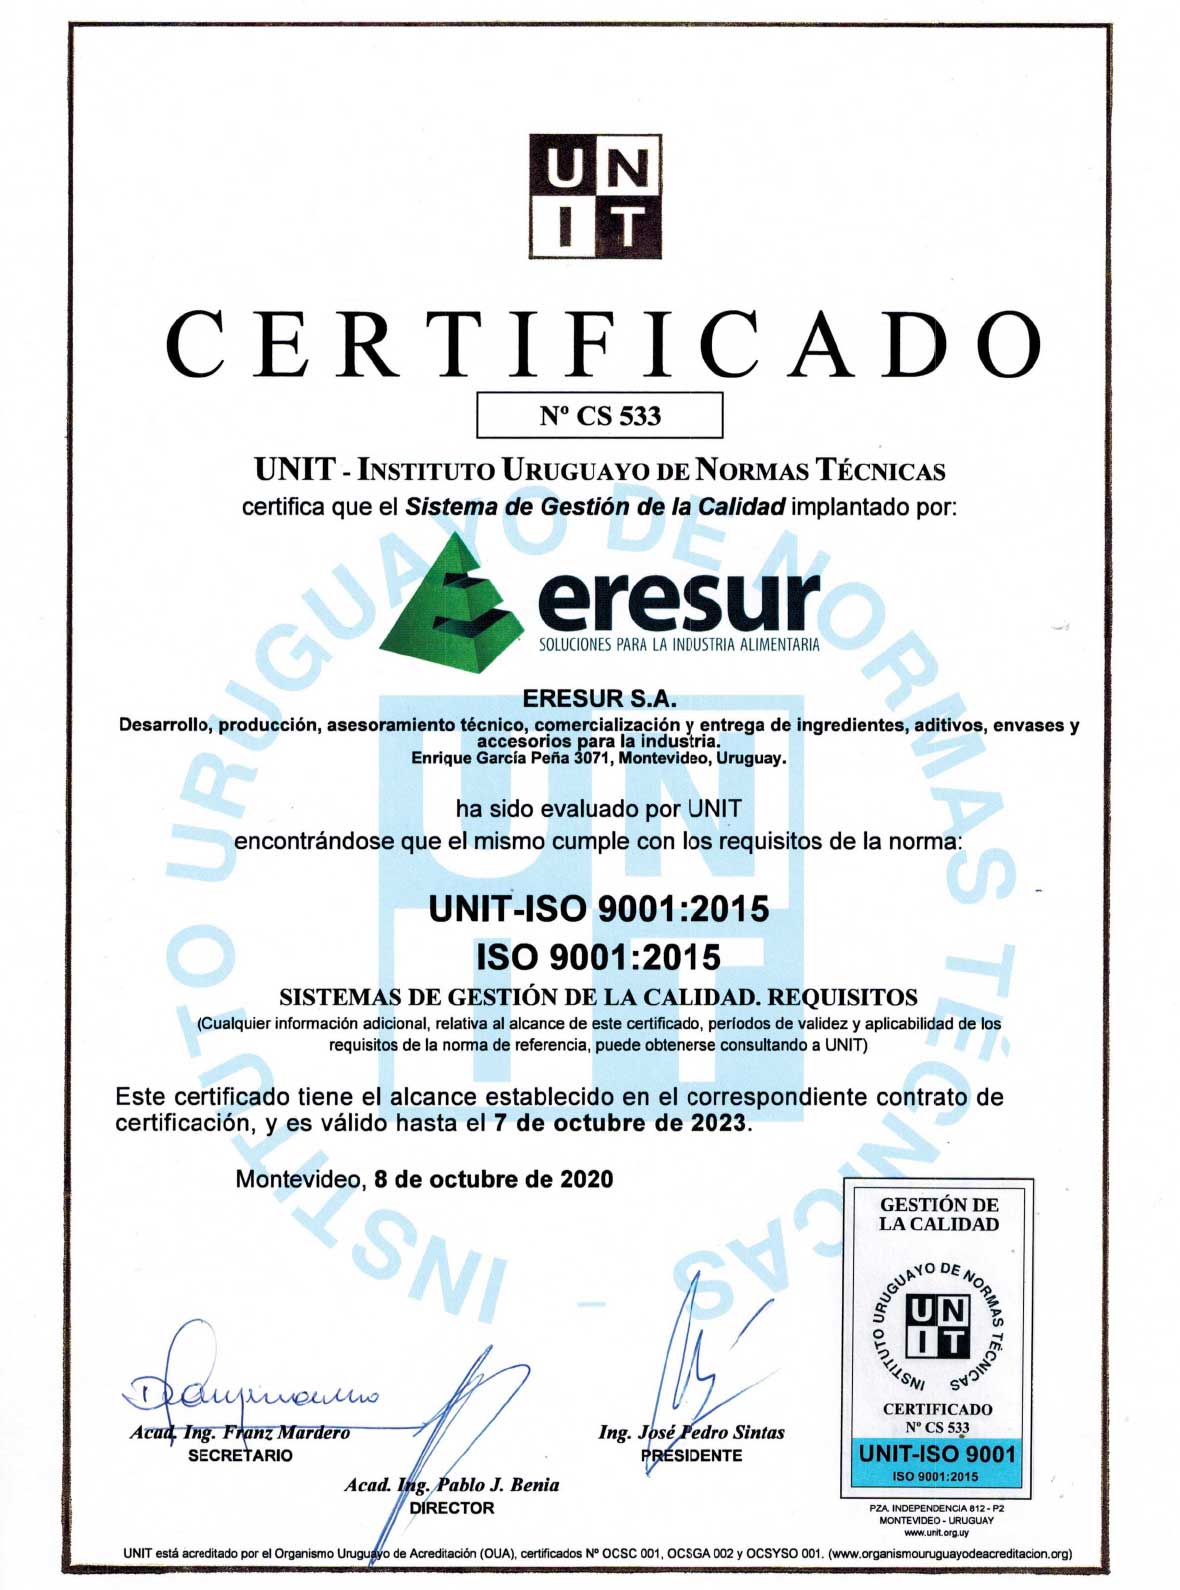 UNIT ISO9001 / 2015 quality certified.